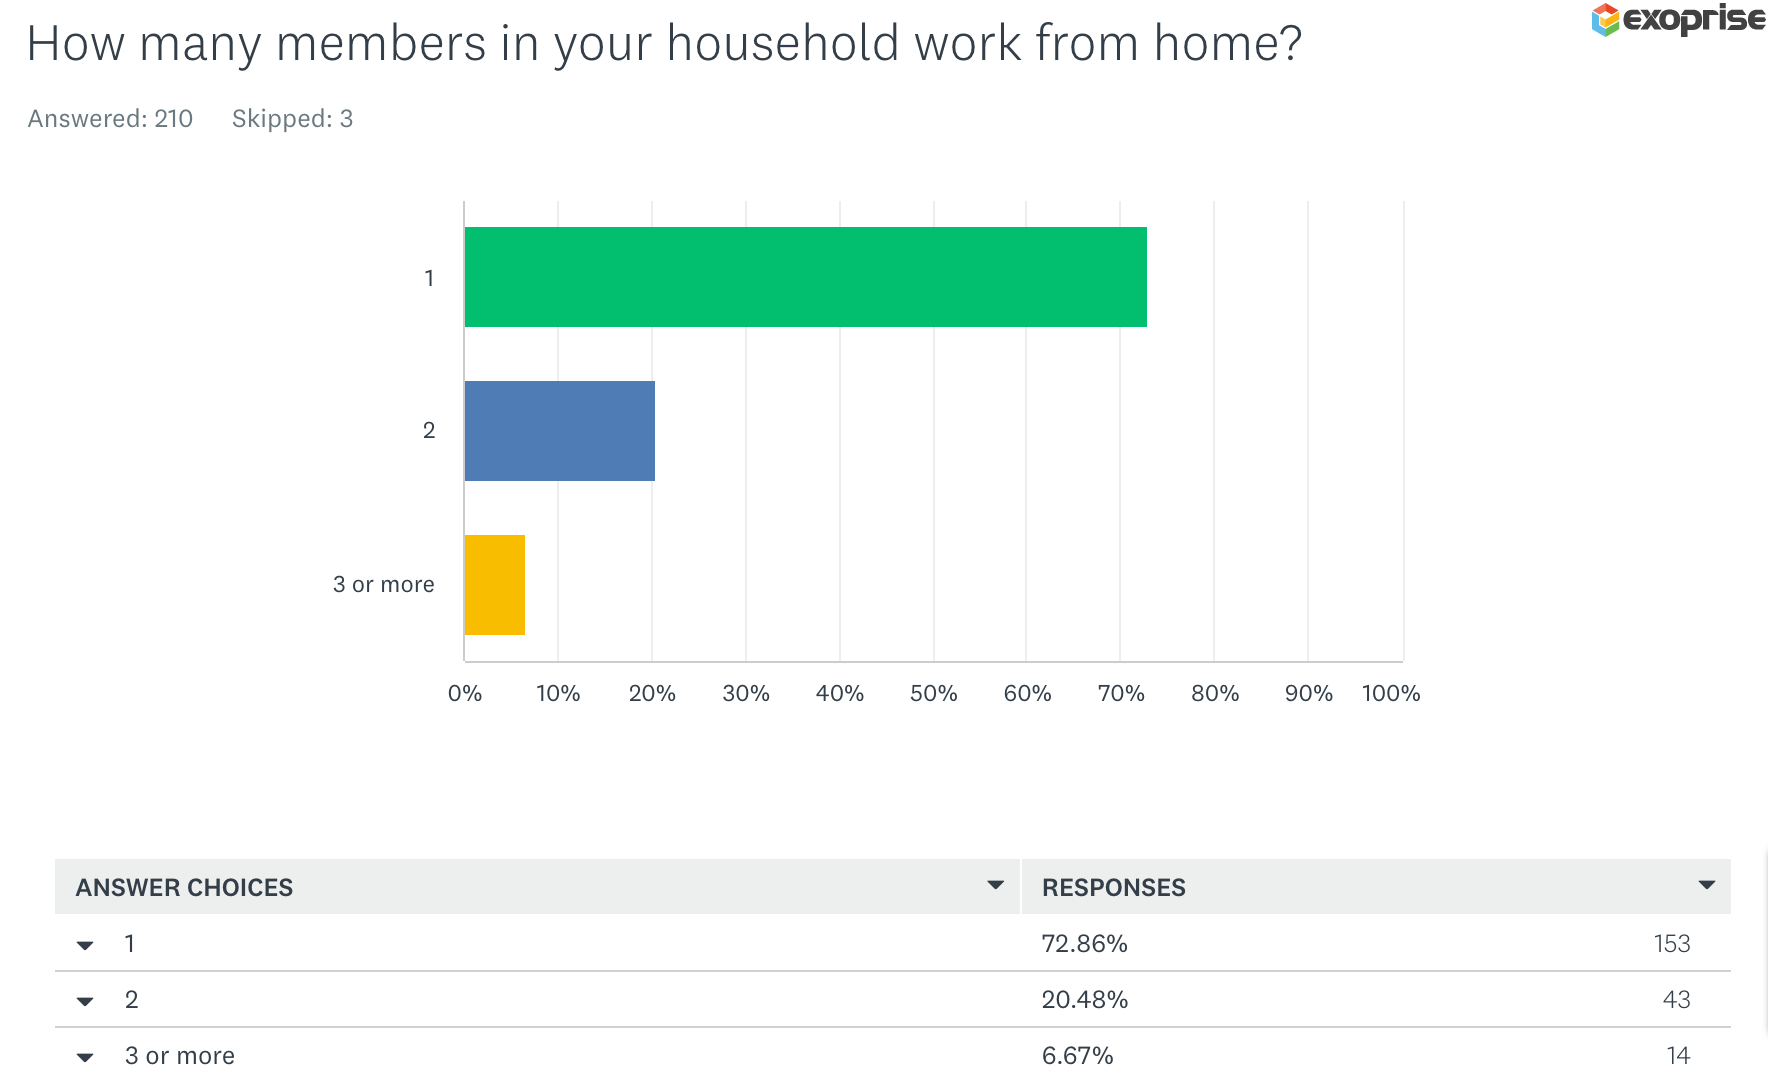 How many household members work from home?